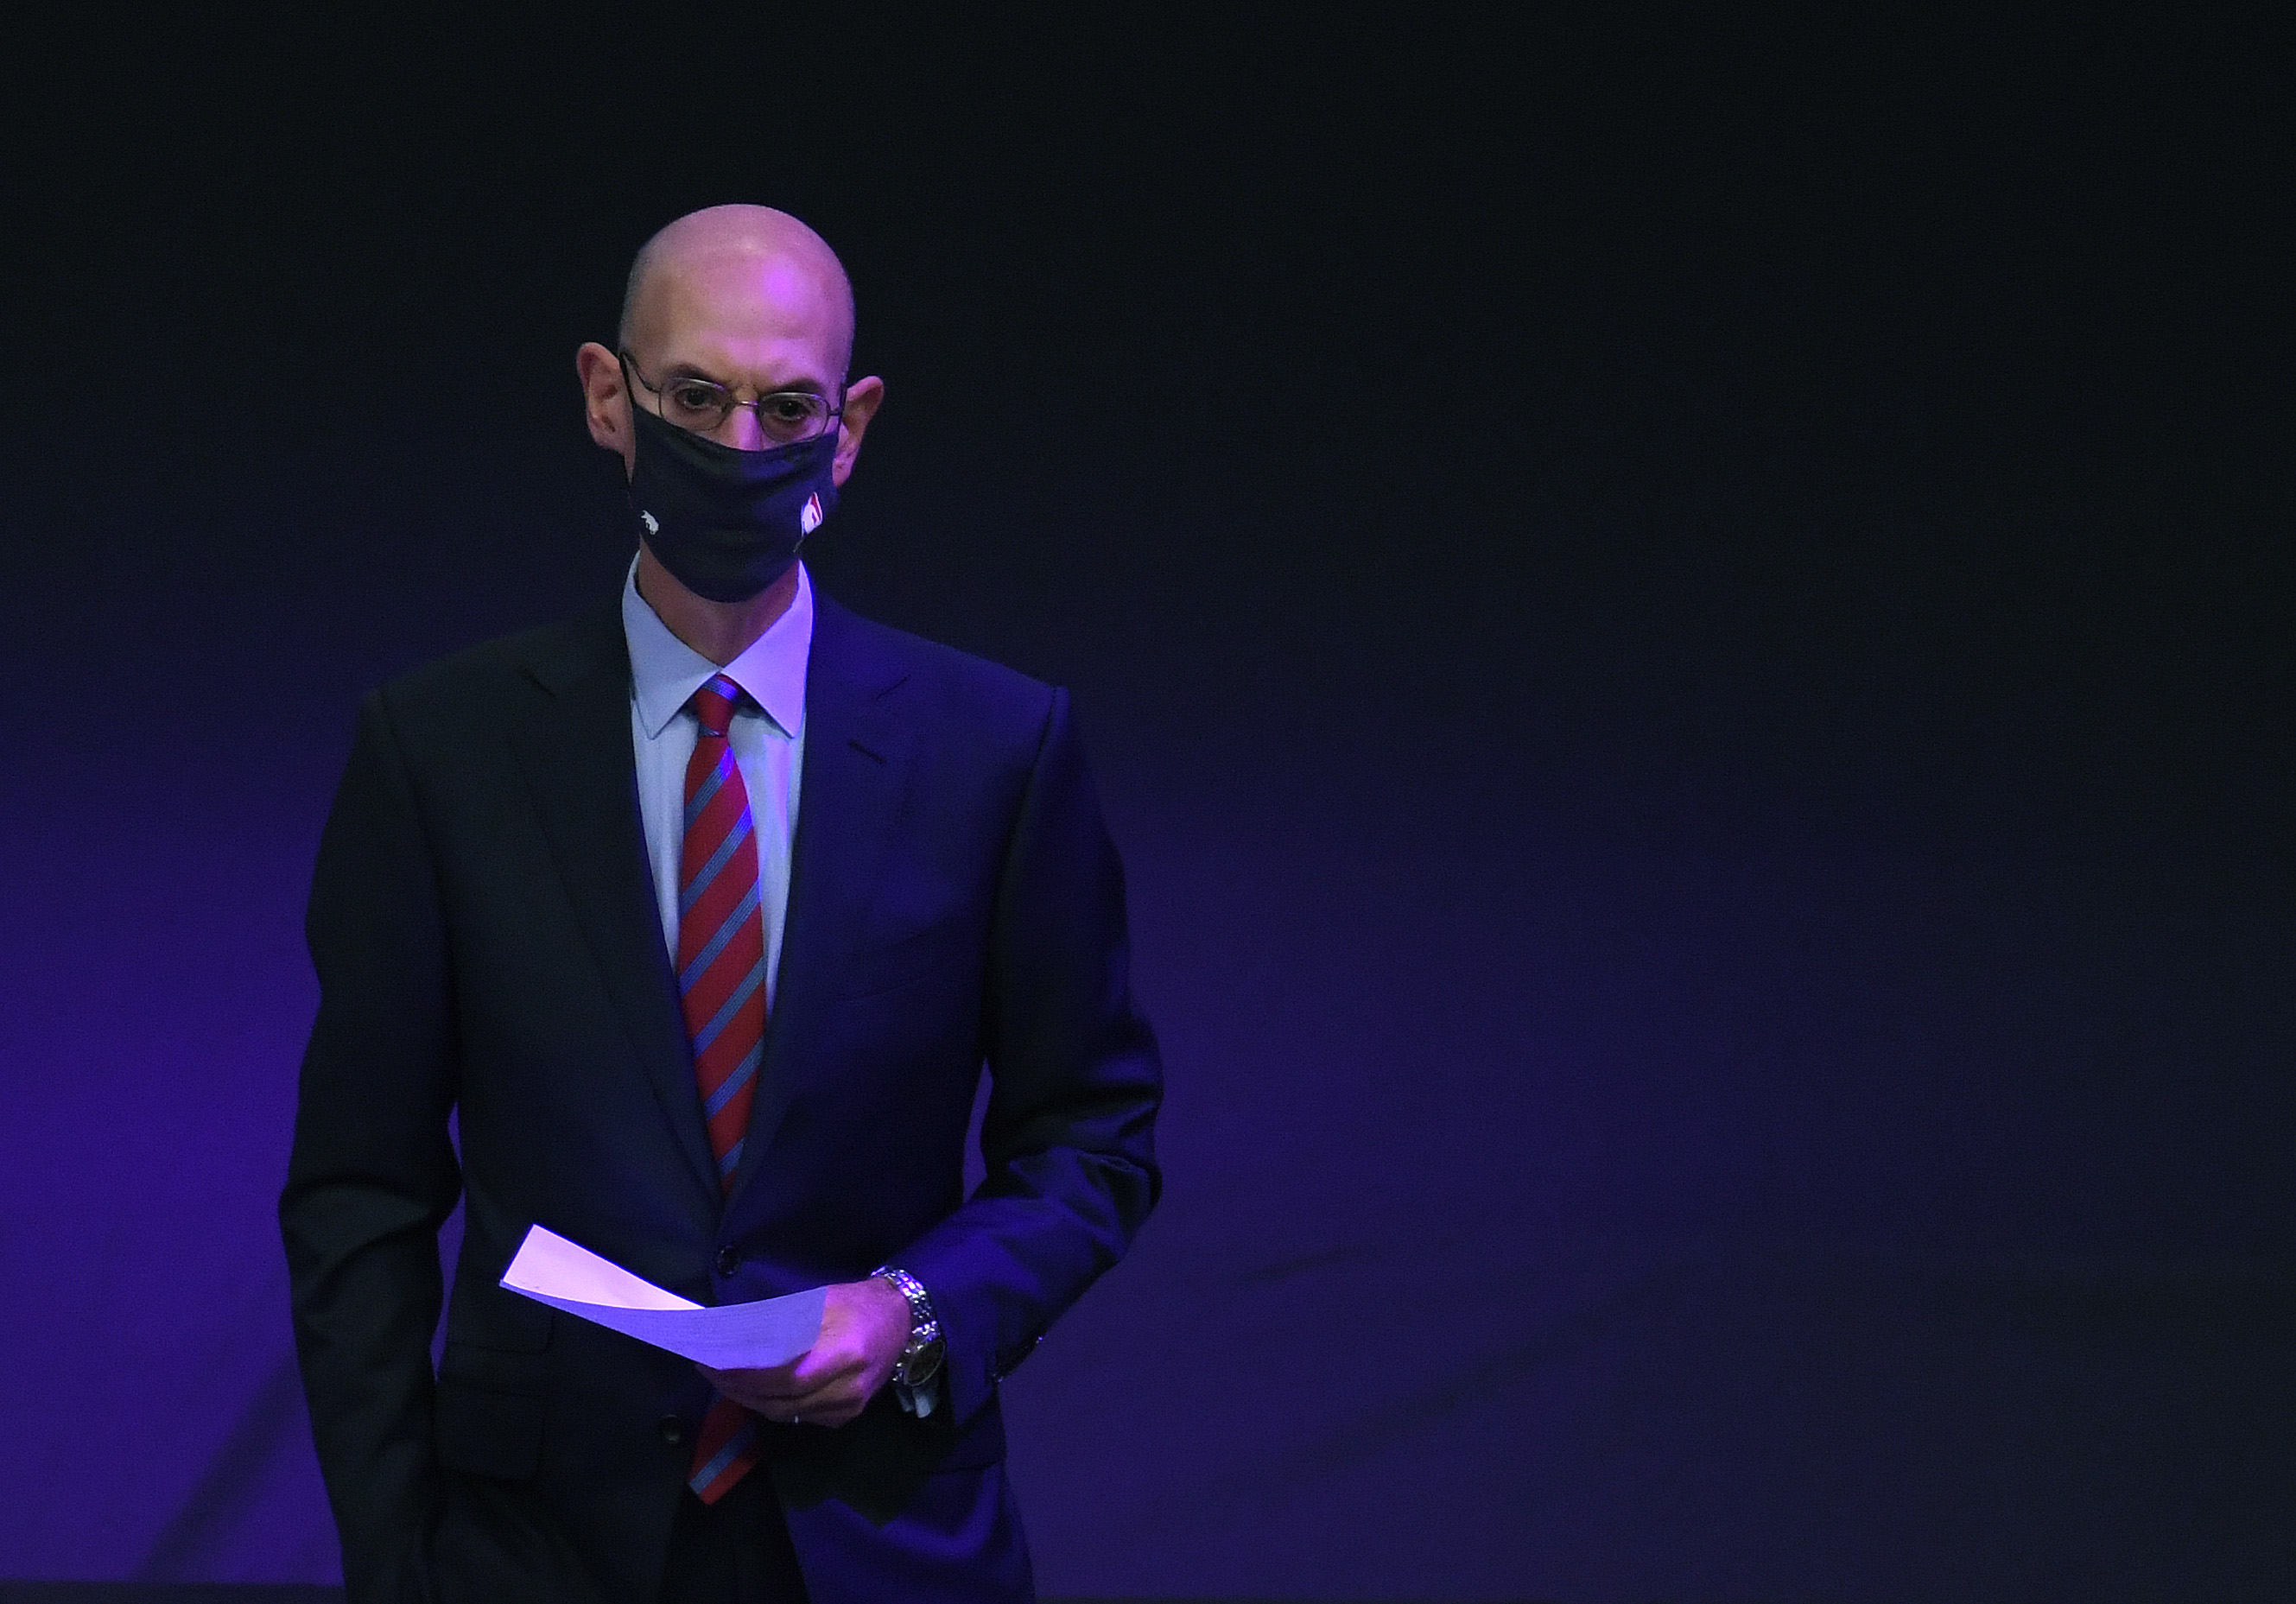 NBA Commissioner Adam Silver waits to speak at the Los Angeles Lakers championship ring ceremony before the season opening game against the LA Clippers at Staples Center on December 22, 2020 in Los Angeles, California.